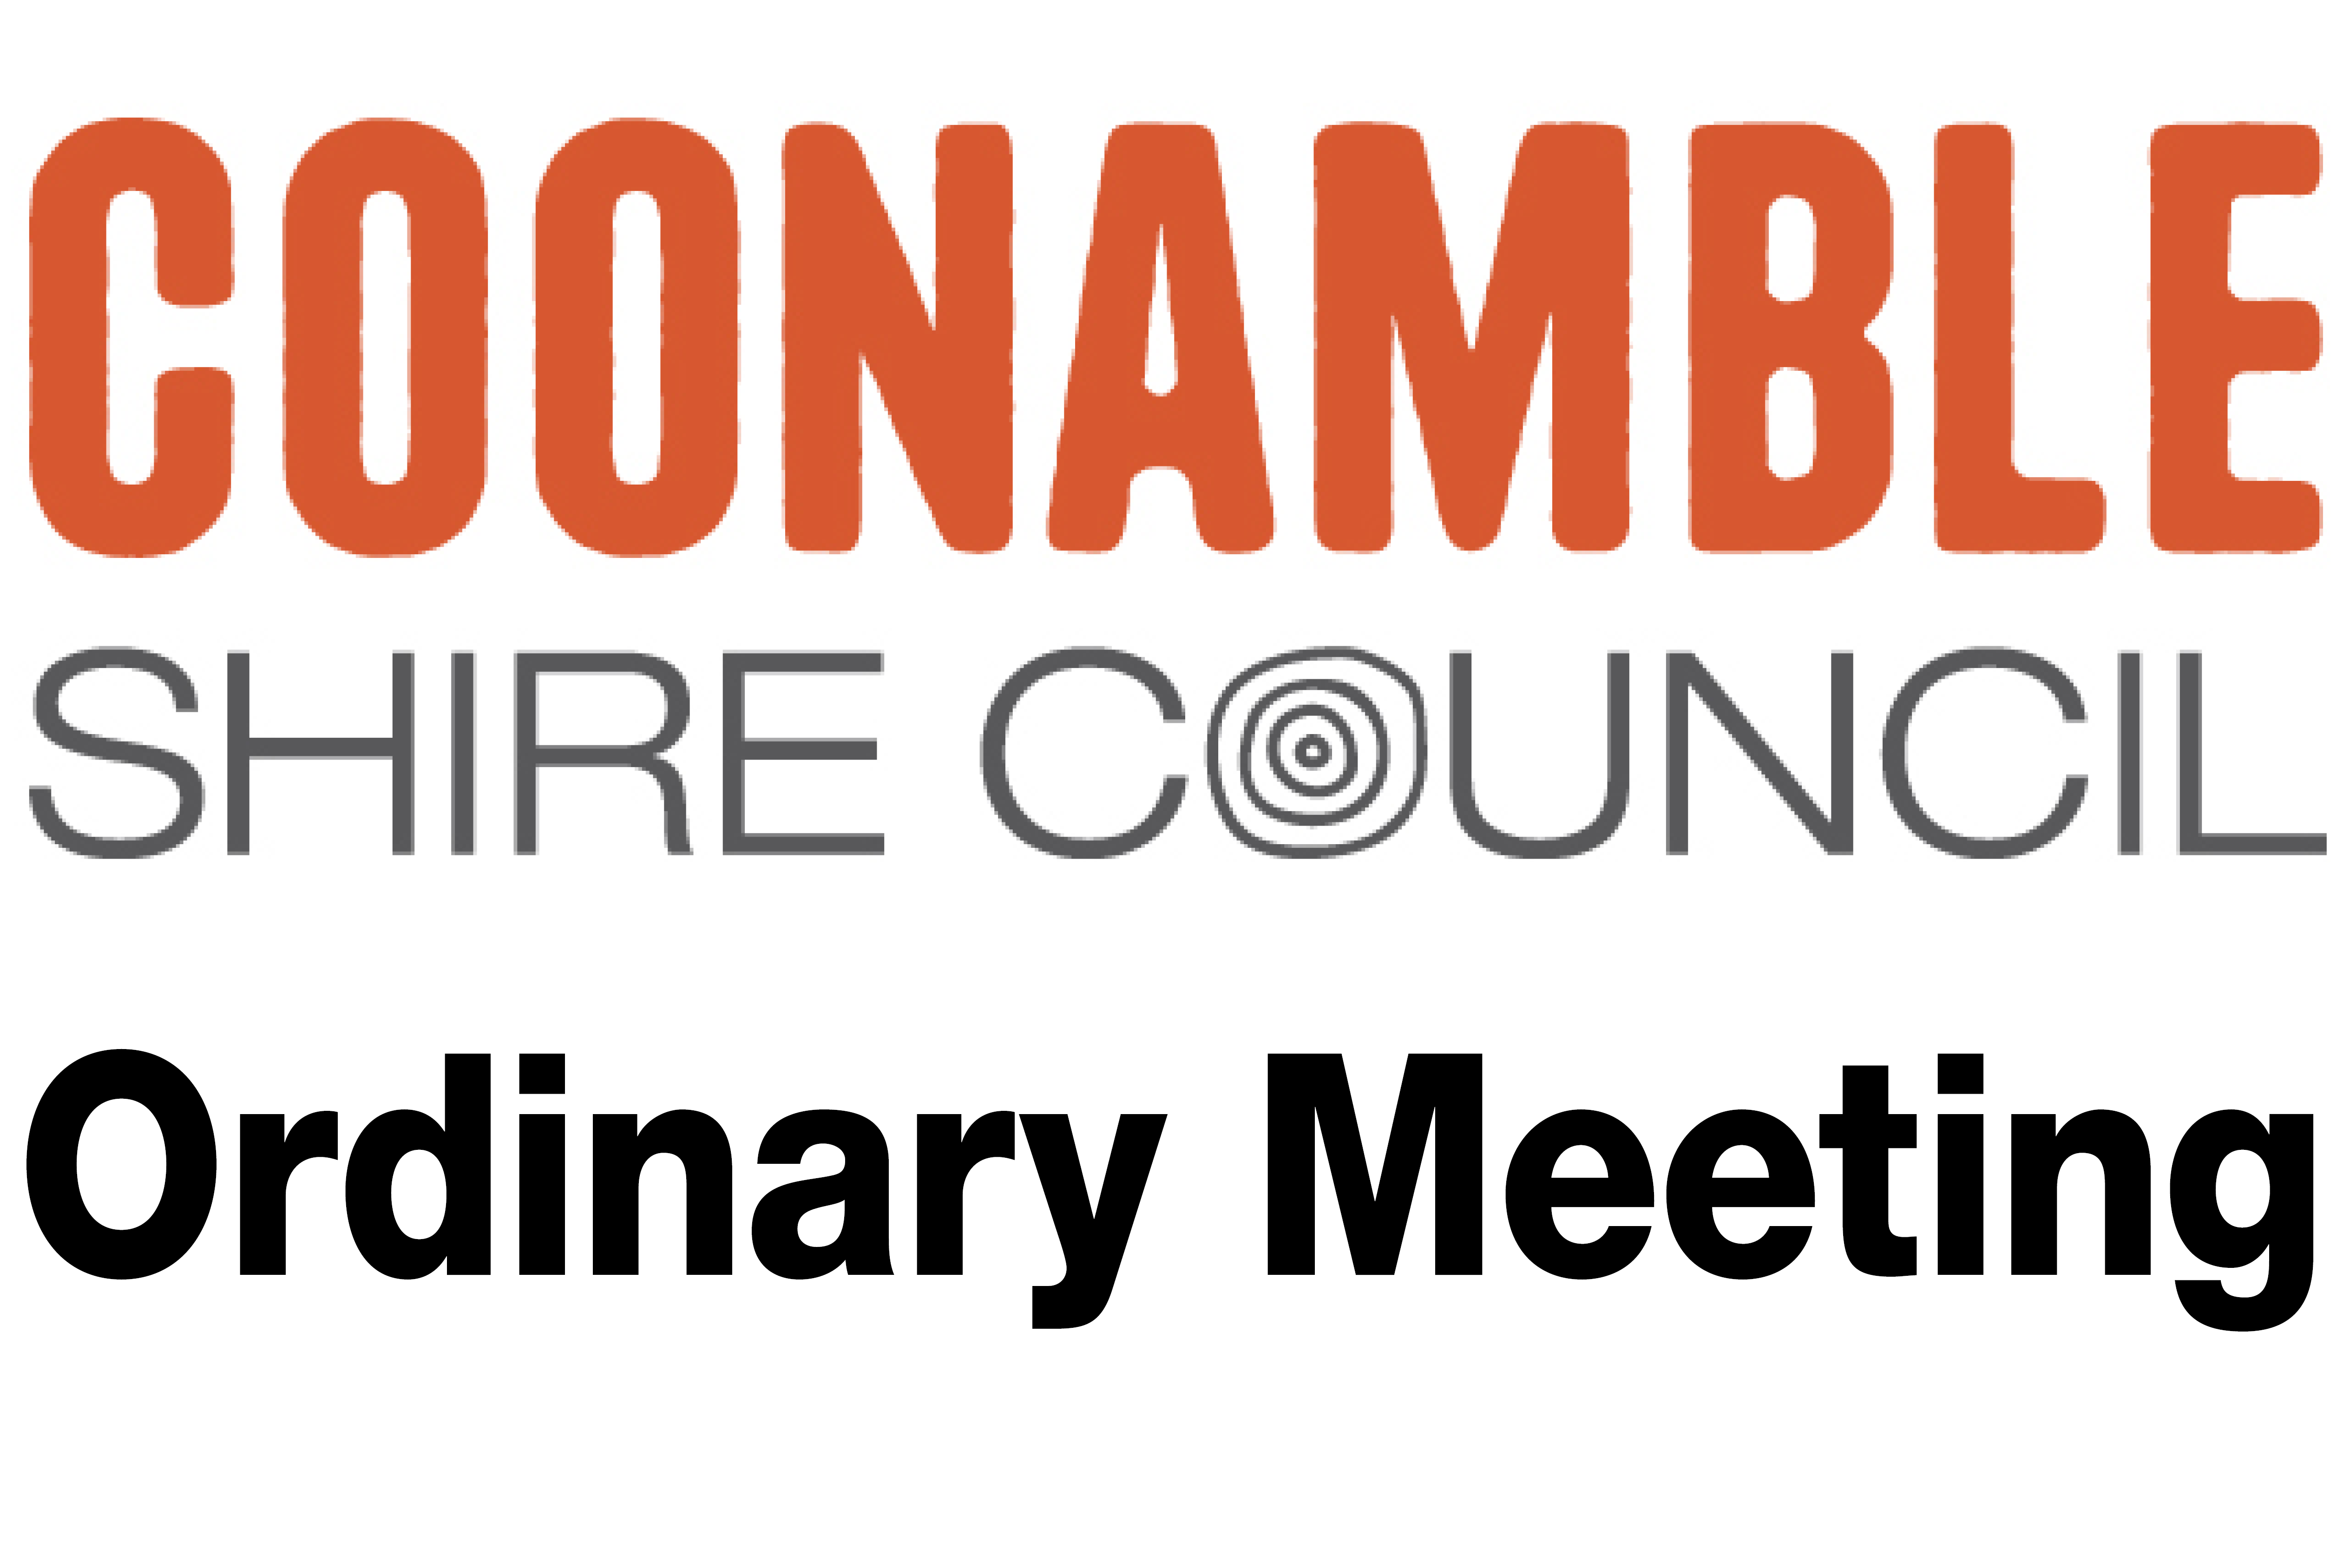 Extra-Ordinary and Ordinary Meeting of Coonamble Shire Council (in Coonamble)